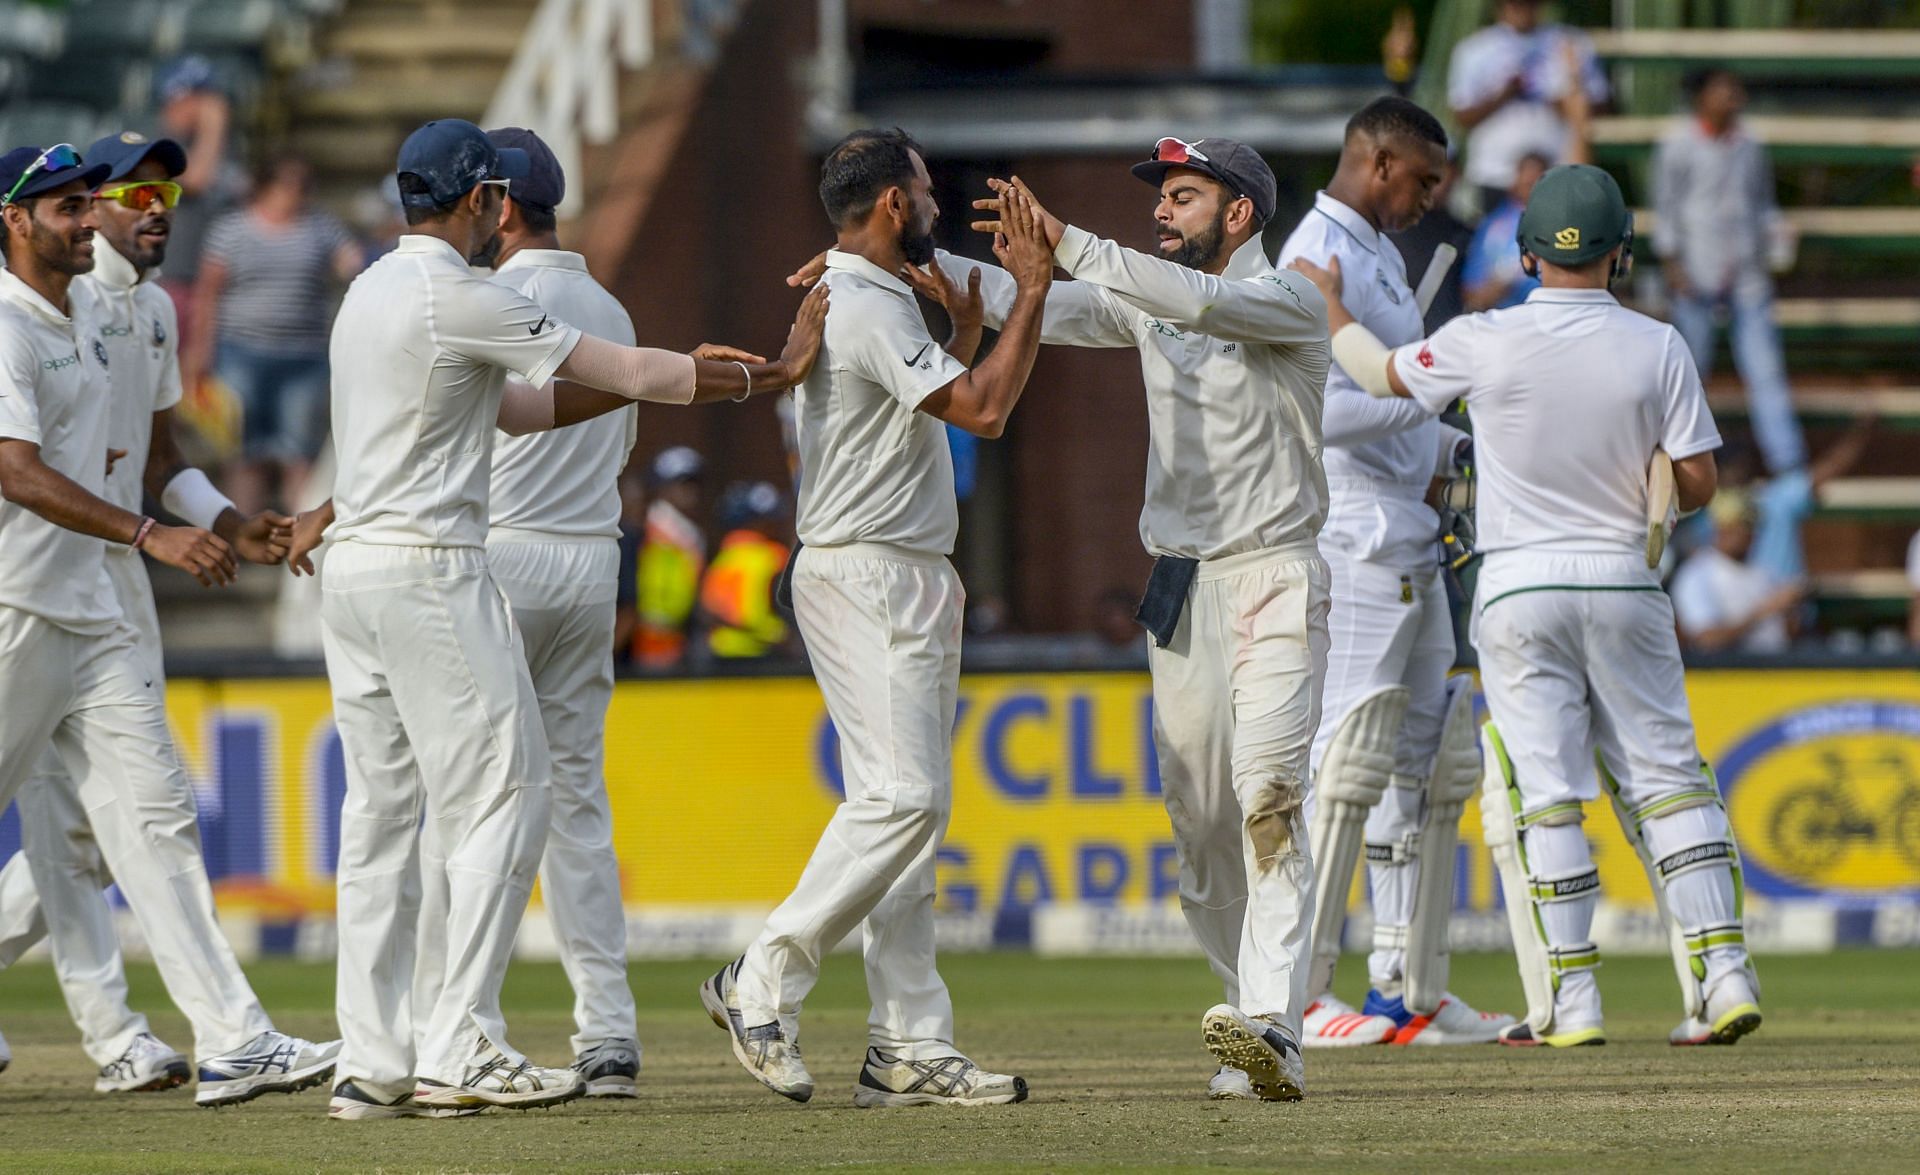 India will head to South Africa to play an ICC World Test Championship series